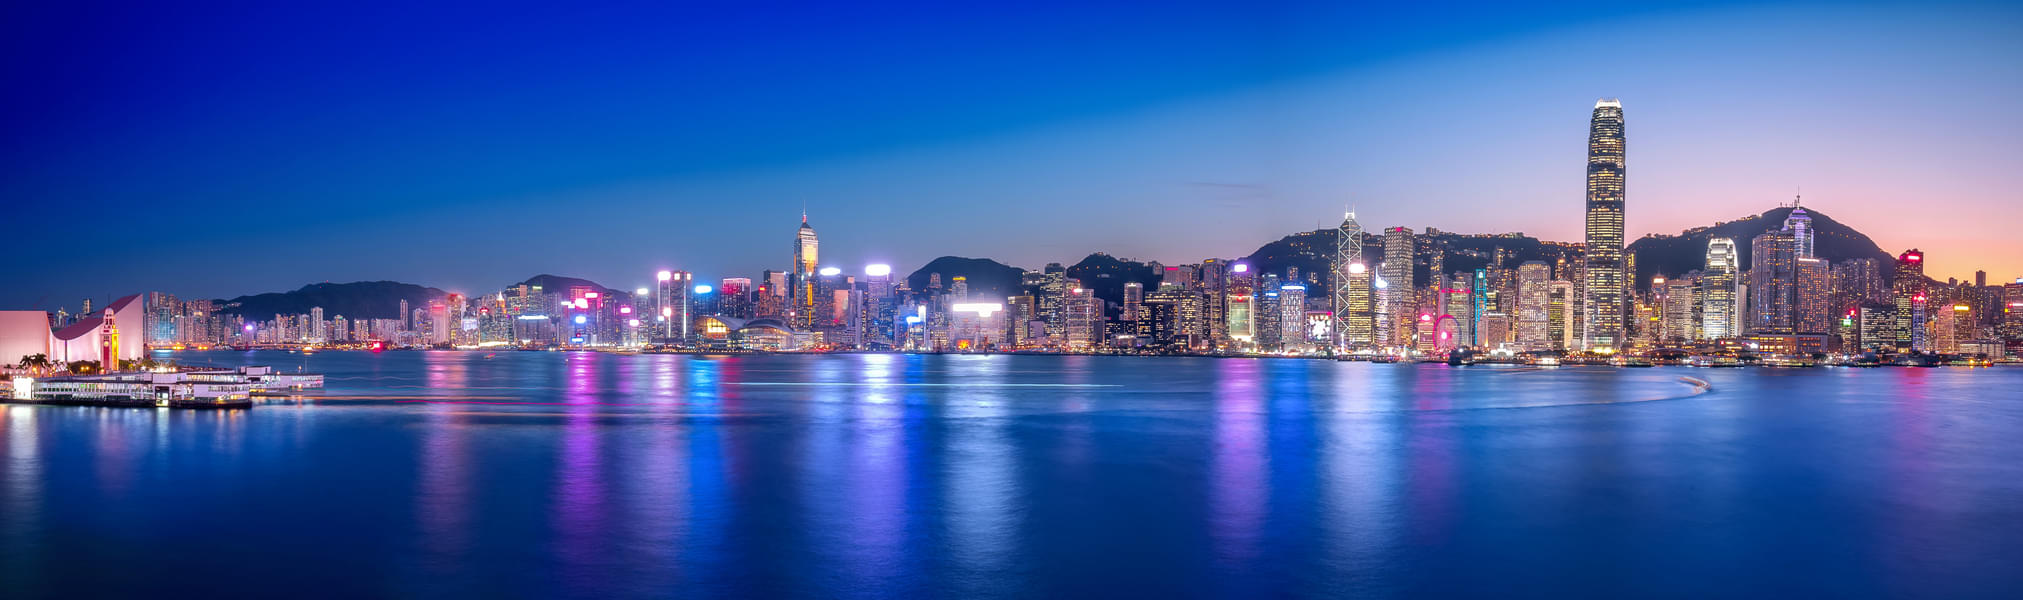 City And Harbour Tour By Night, Hong Kong Image